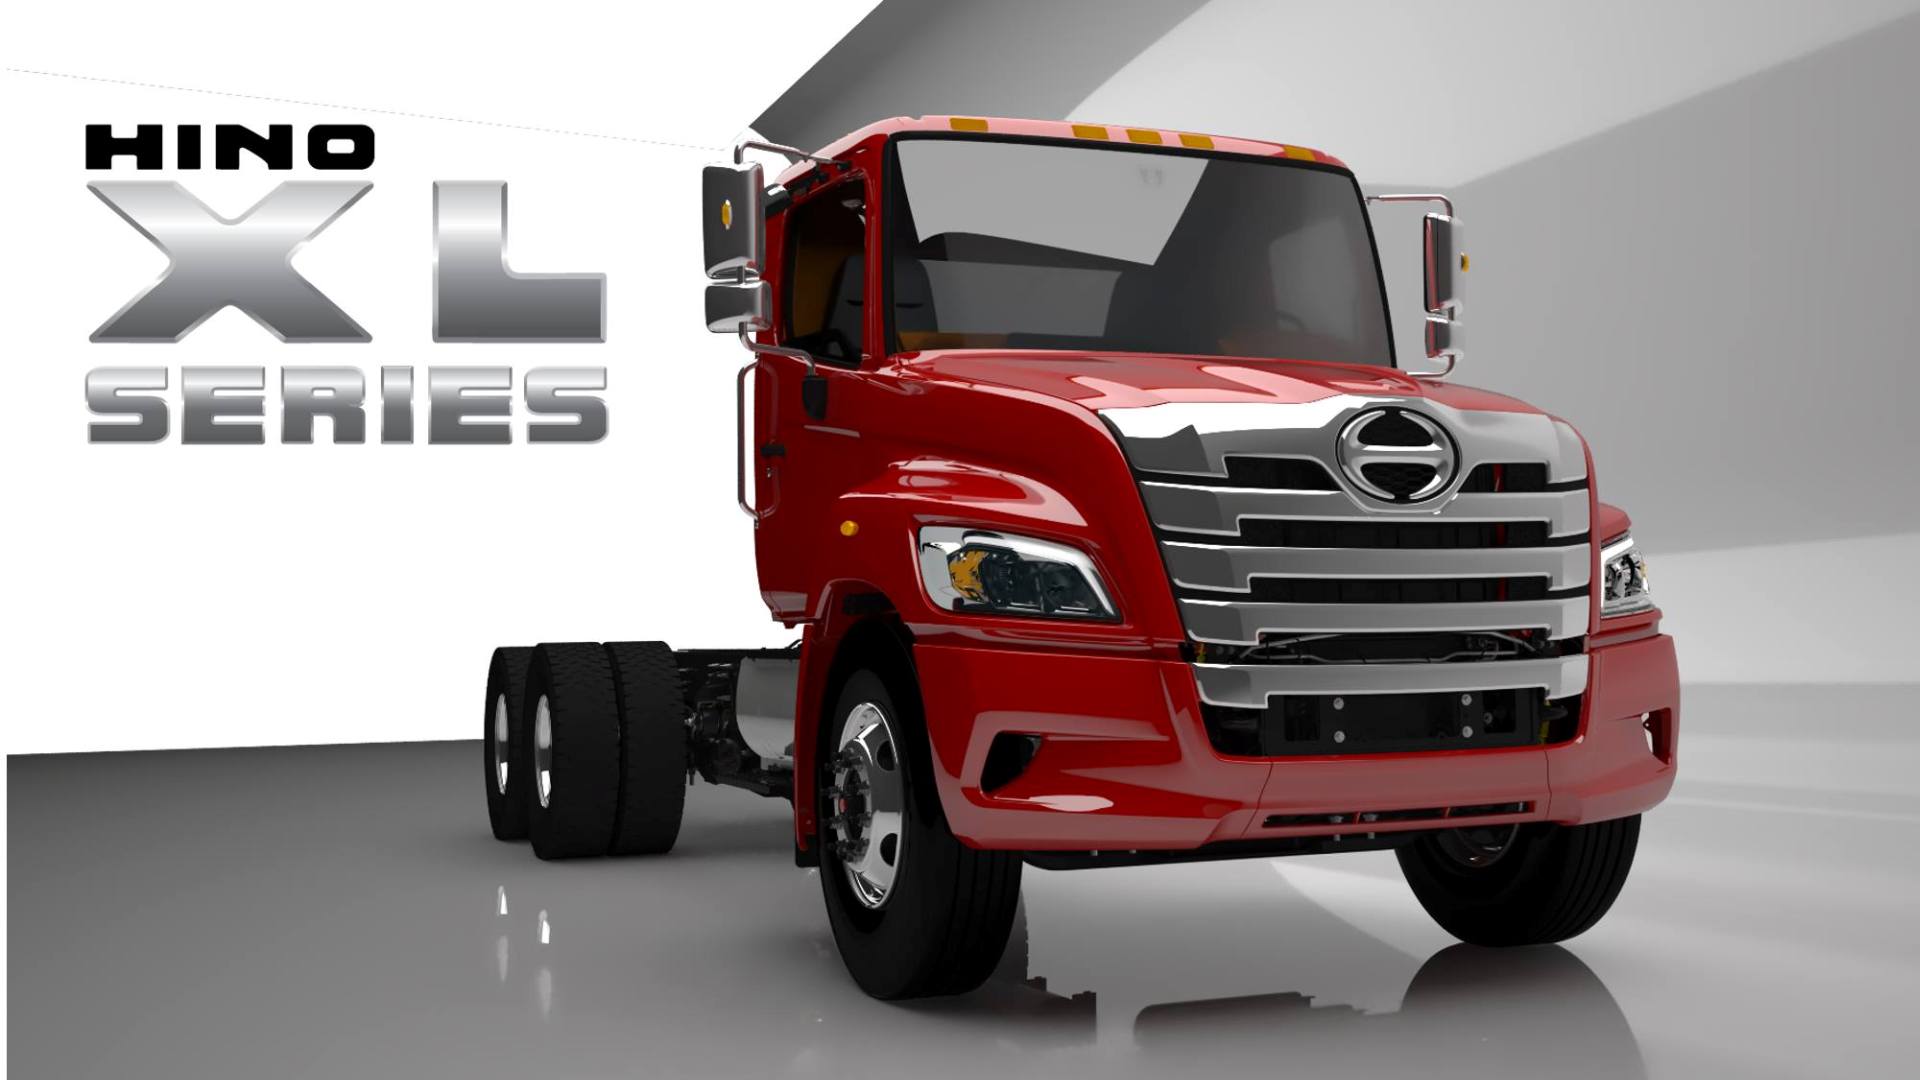 Read more about the article HINO XL7 And XL8 Series Trucks